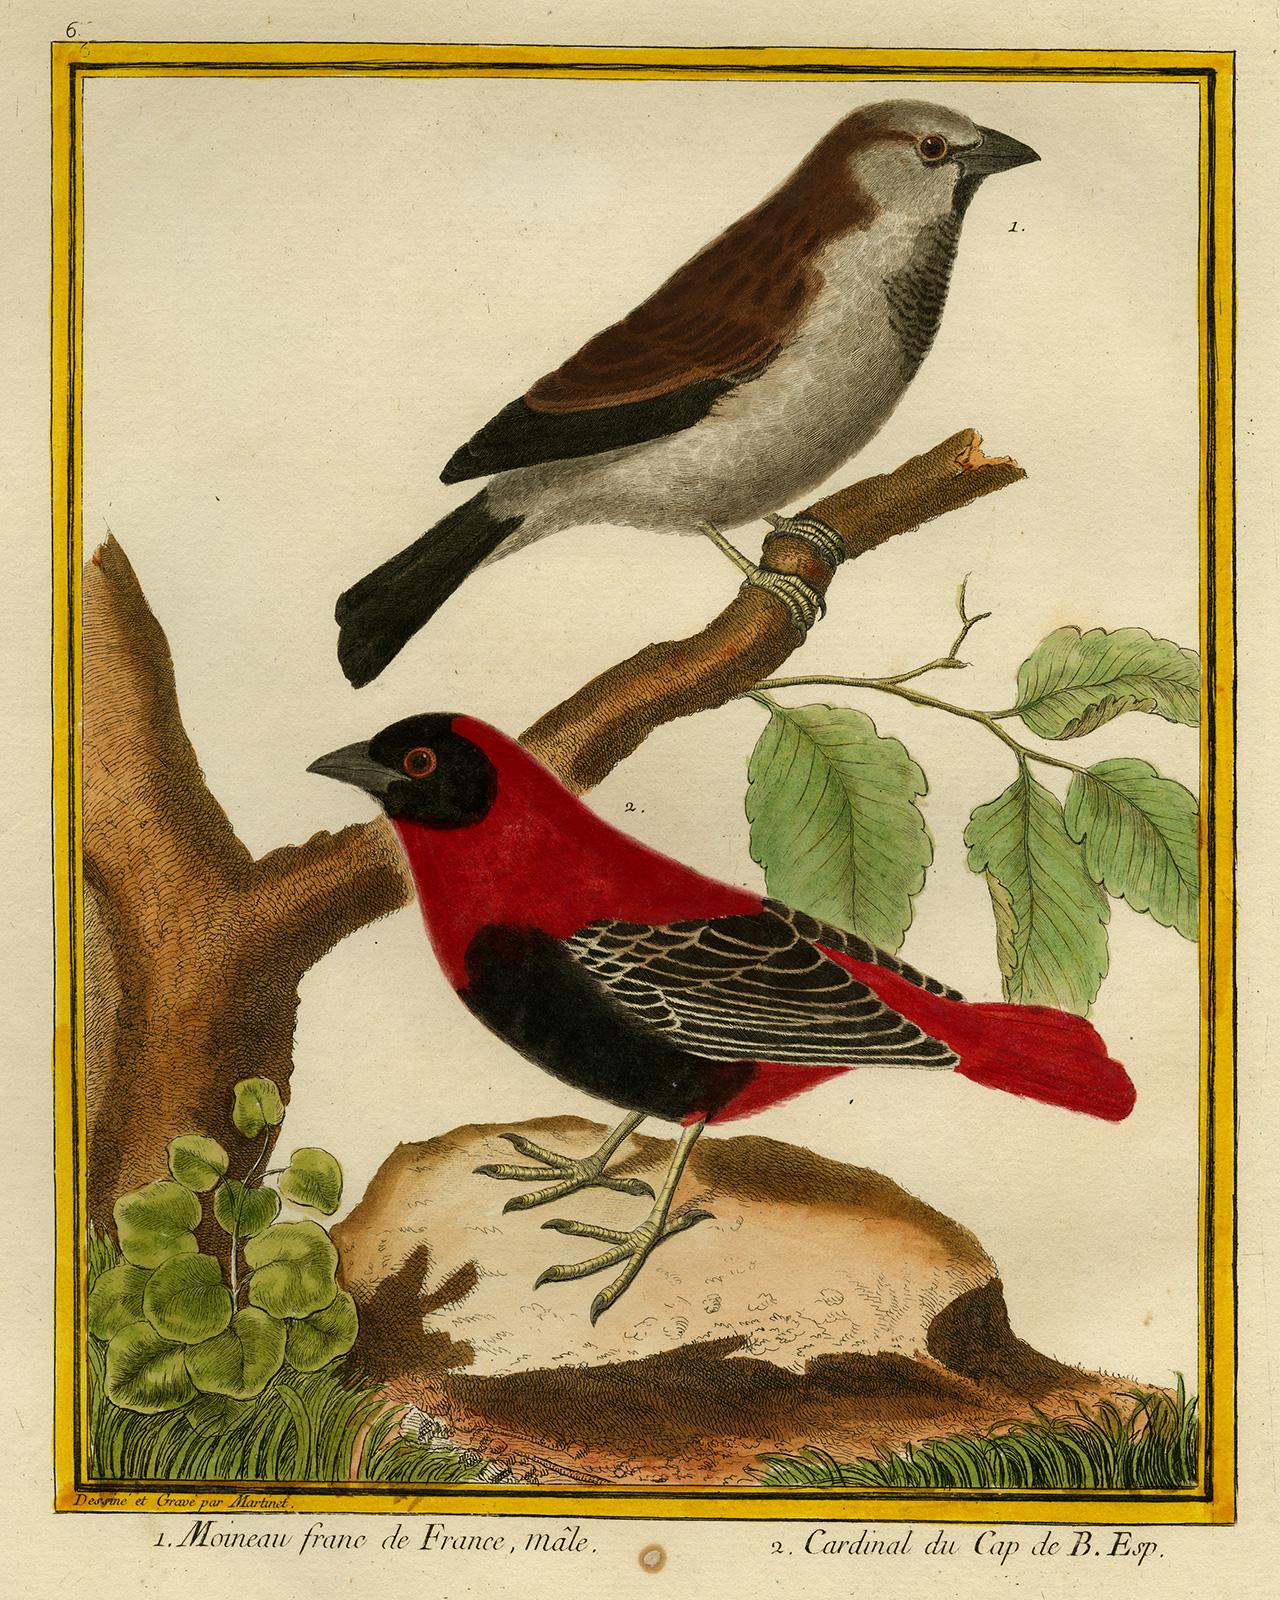 Francois Nicolas Martinet Animal Print - House Sparrow and Cape Cardinal by Martinet - Handcoloured engraving - 18th c.